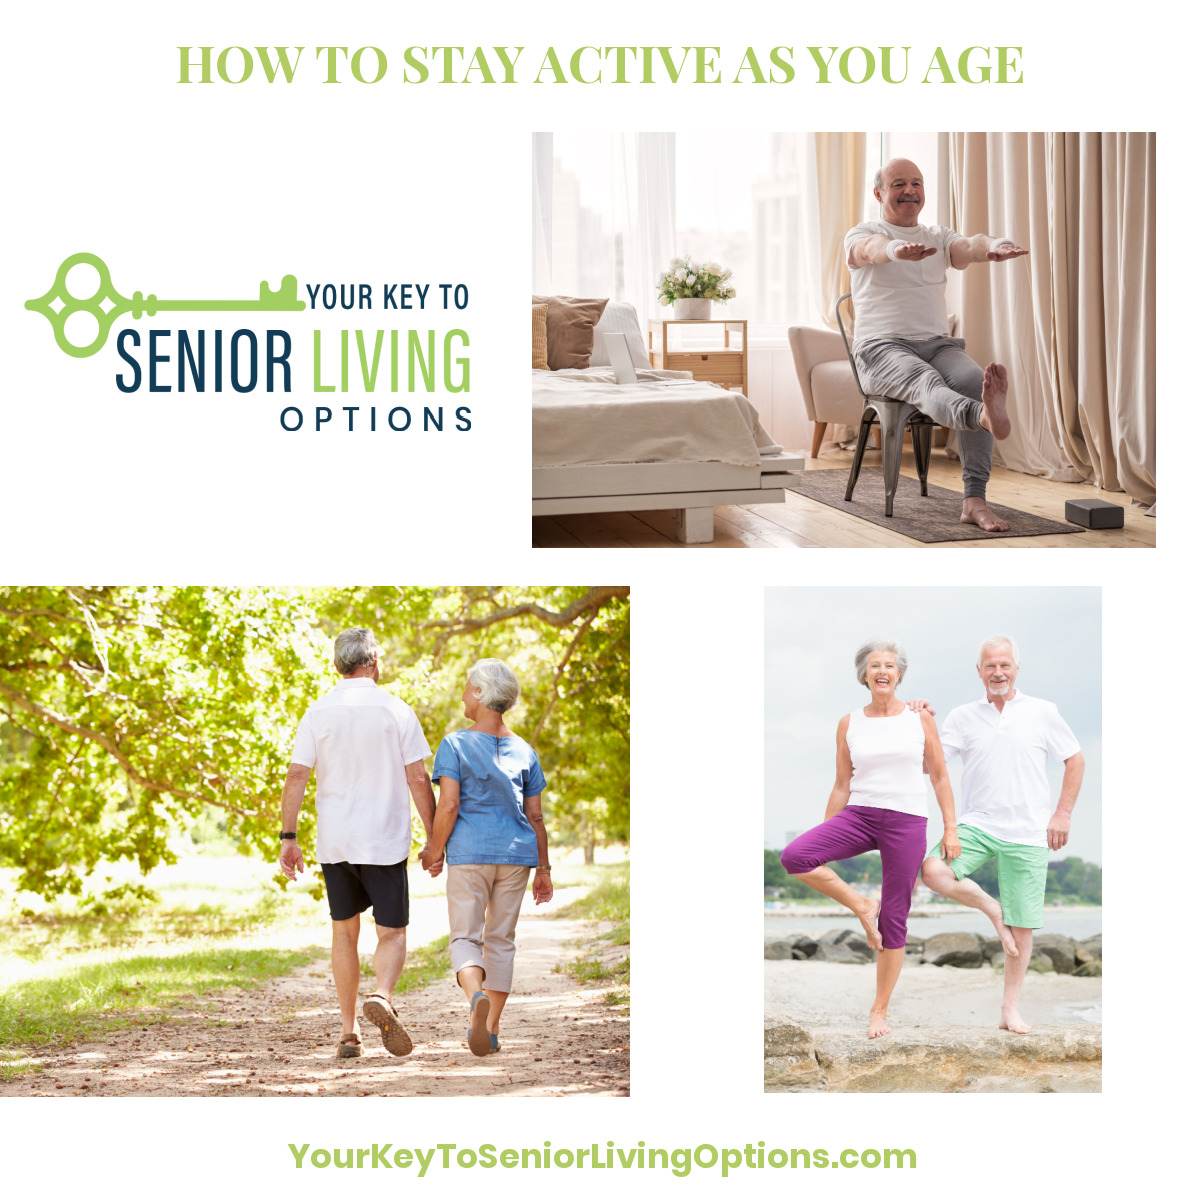 HOW TO STAY ACTIVE AS YOU AGE